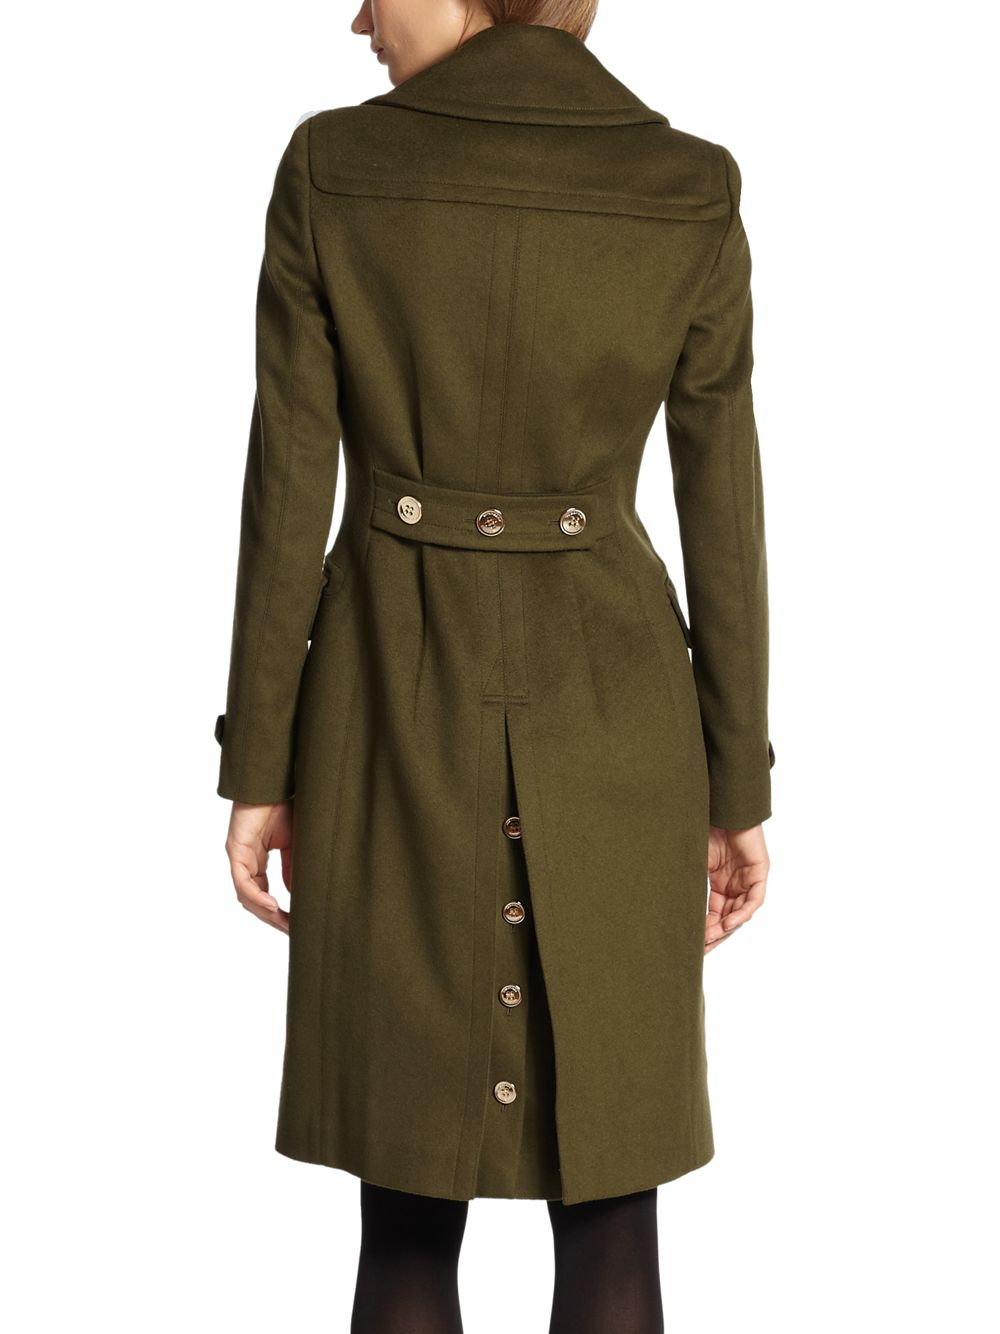 Burberry Doublebreasted Wool Cashmere Military Coat in Olive (Green) - Lyst